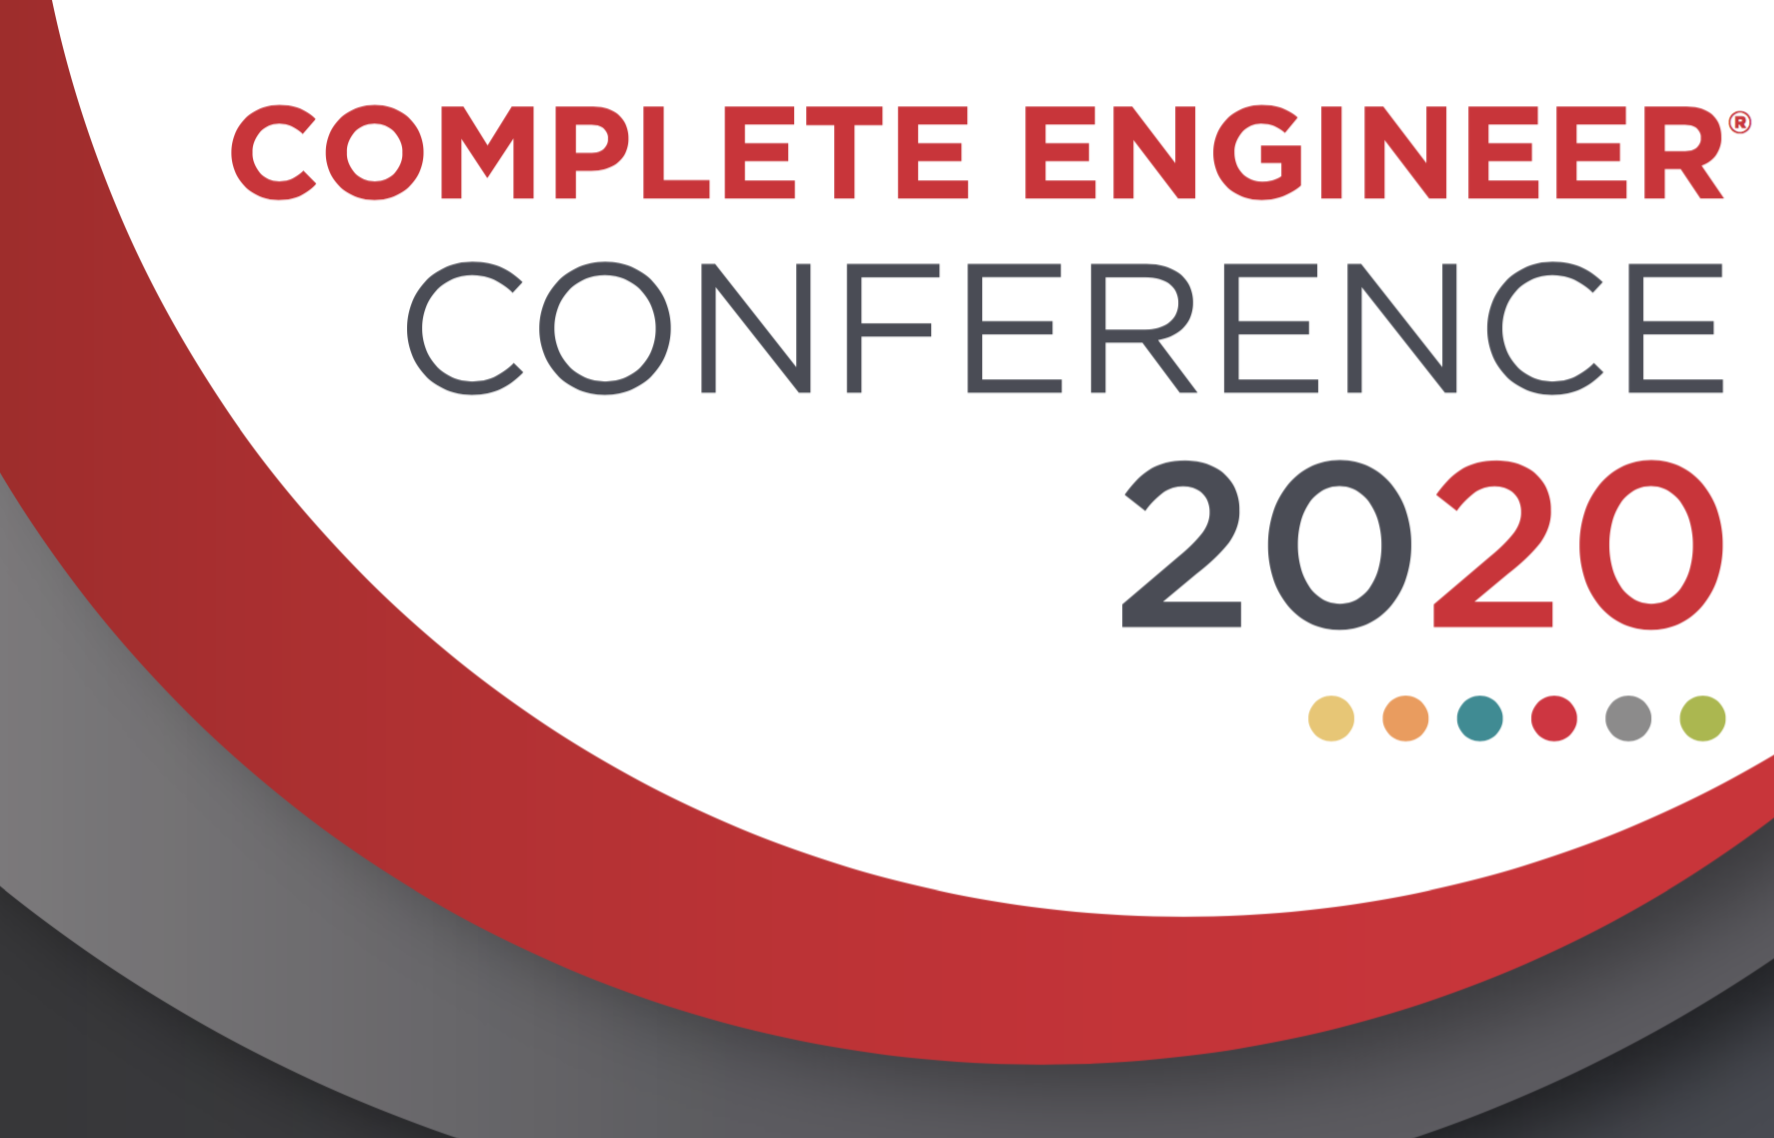 Complete Engineer Conference 2020